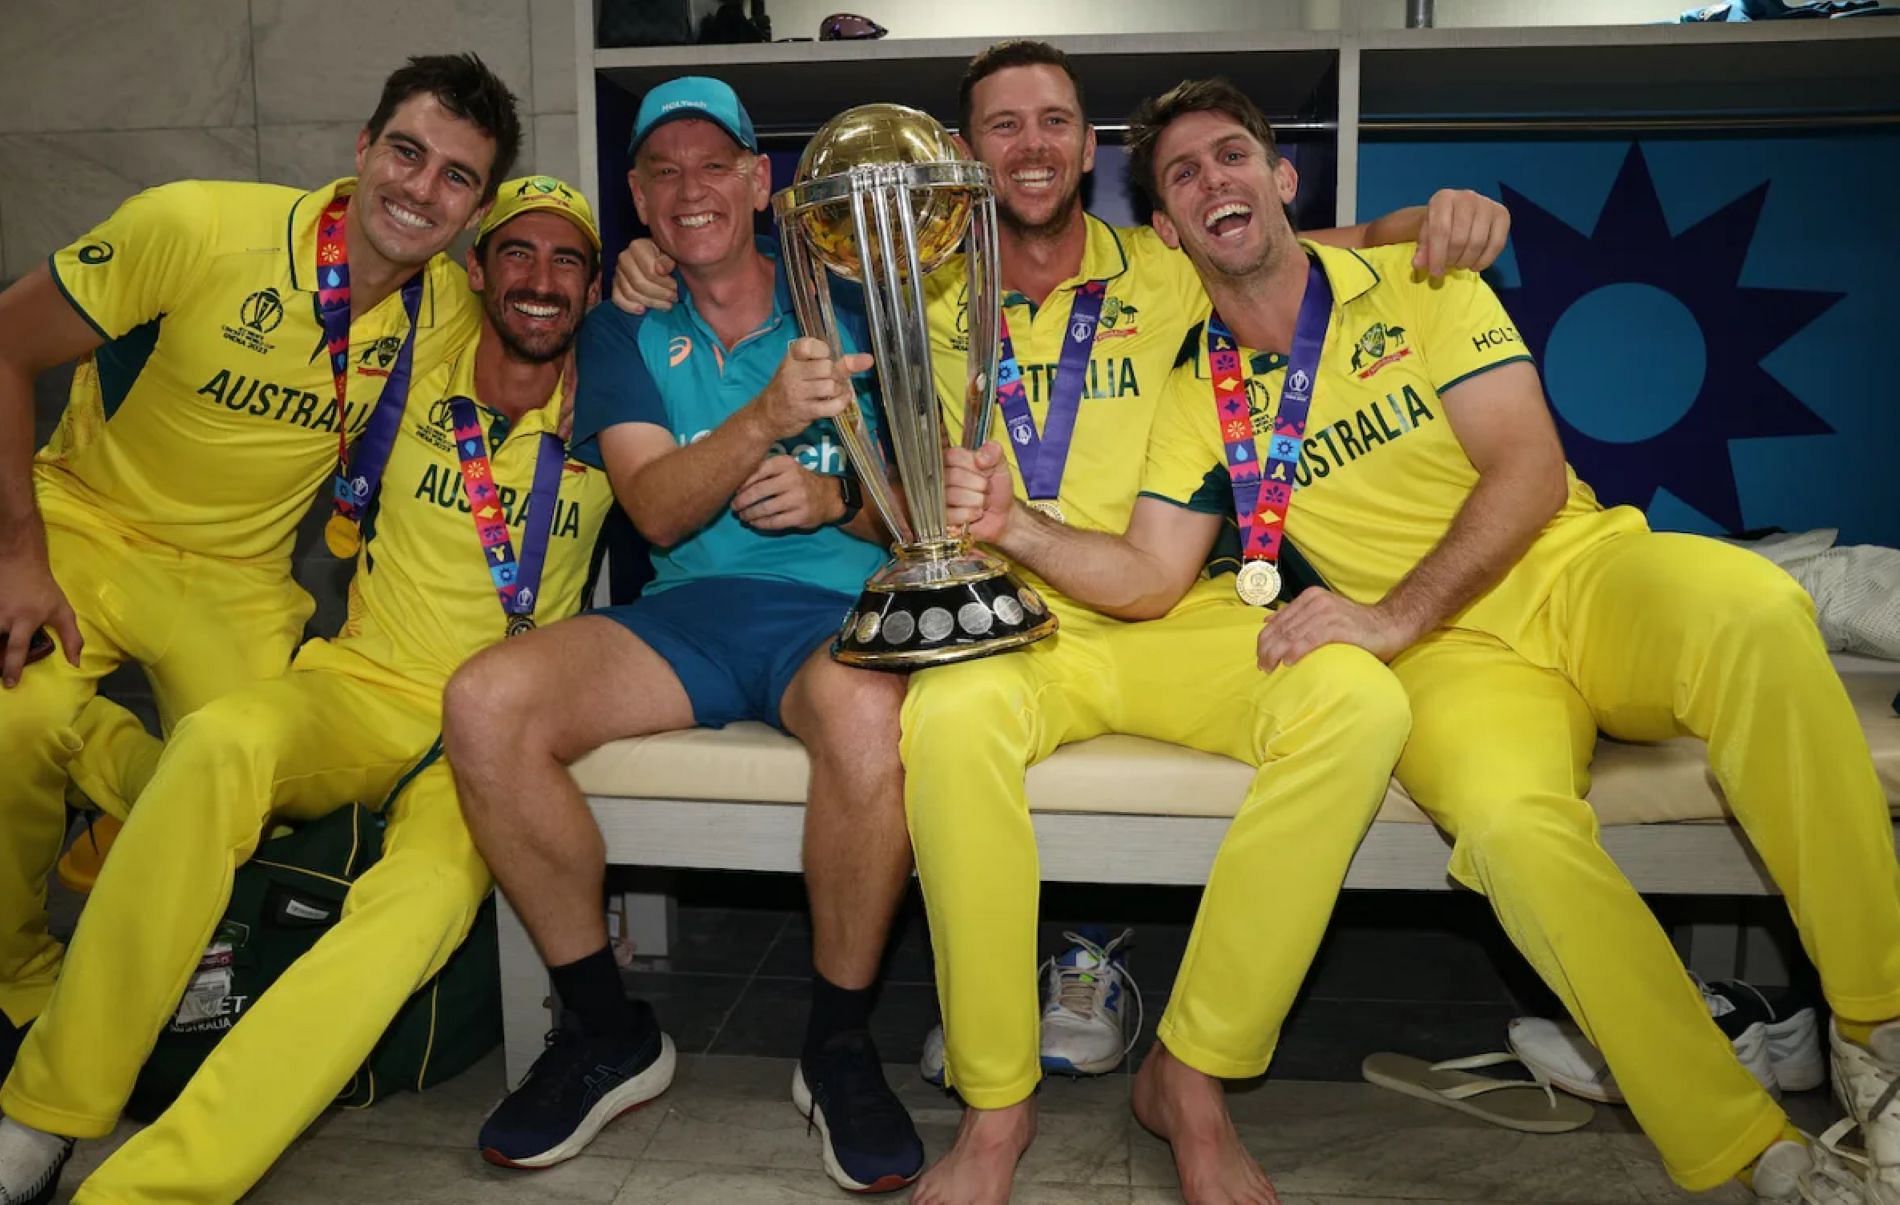 Australia recently celebrated their sixth ODI World Cup title.